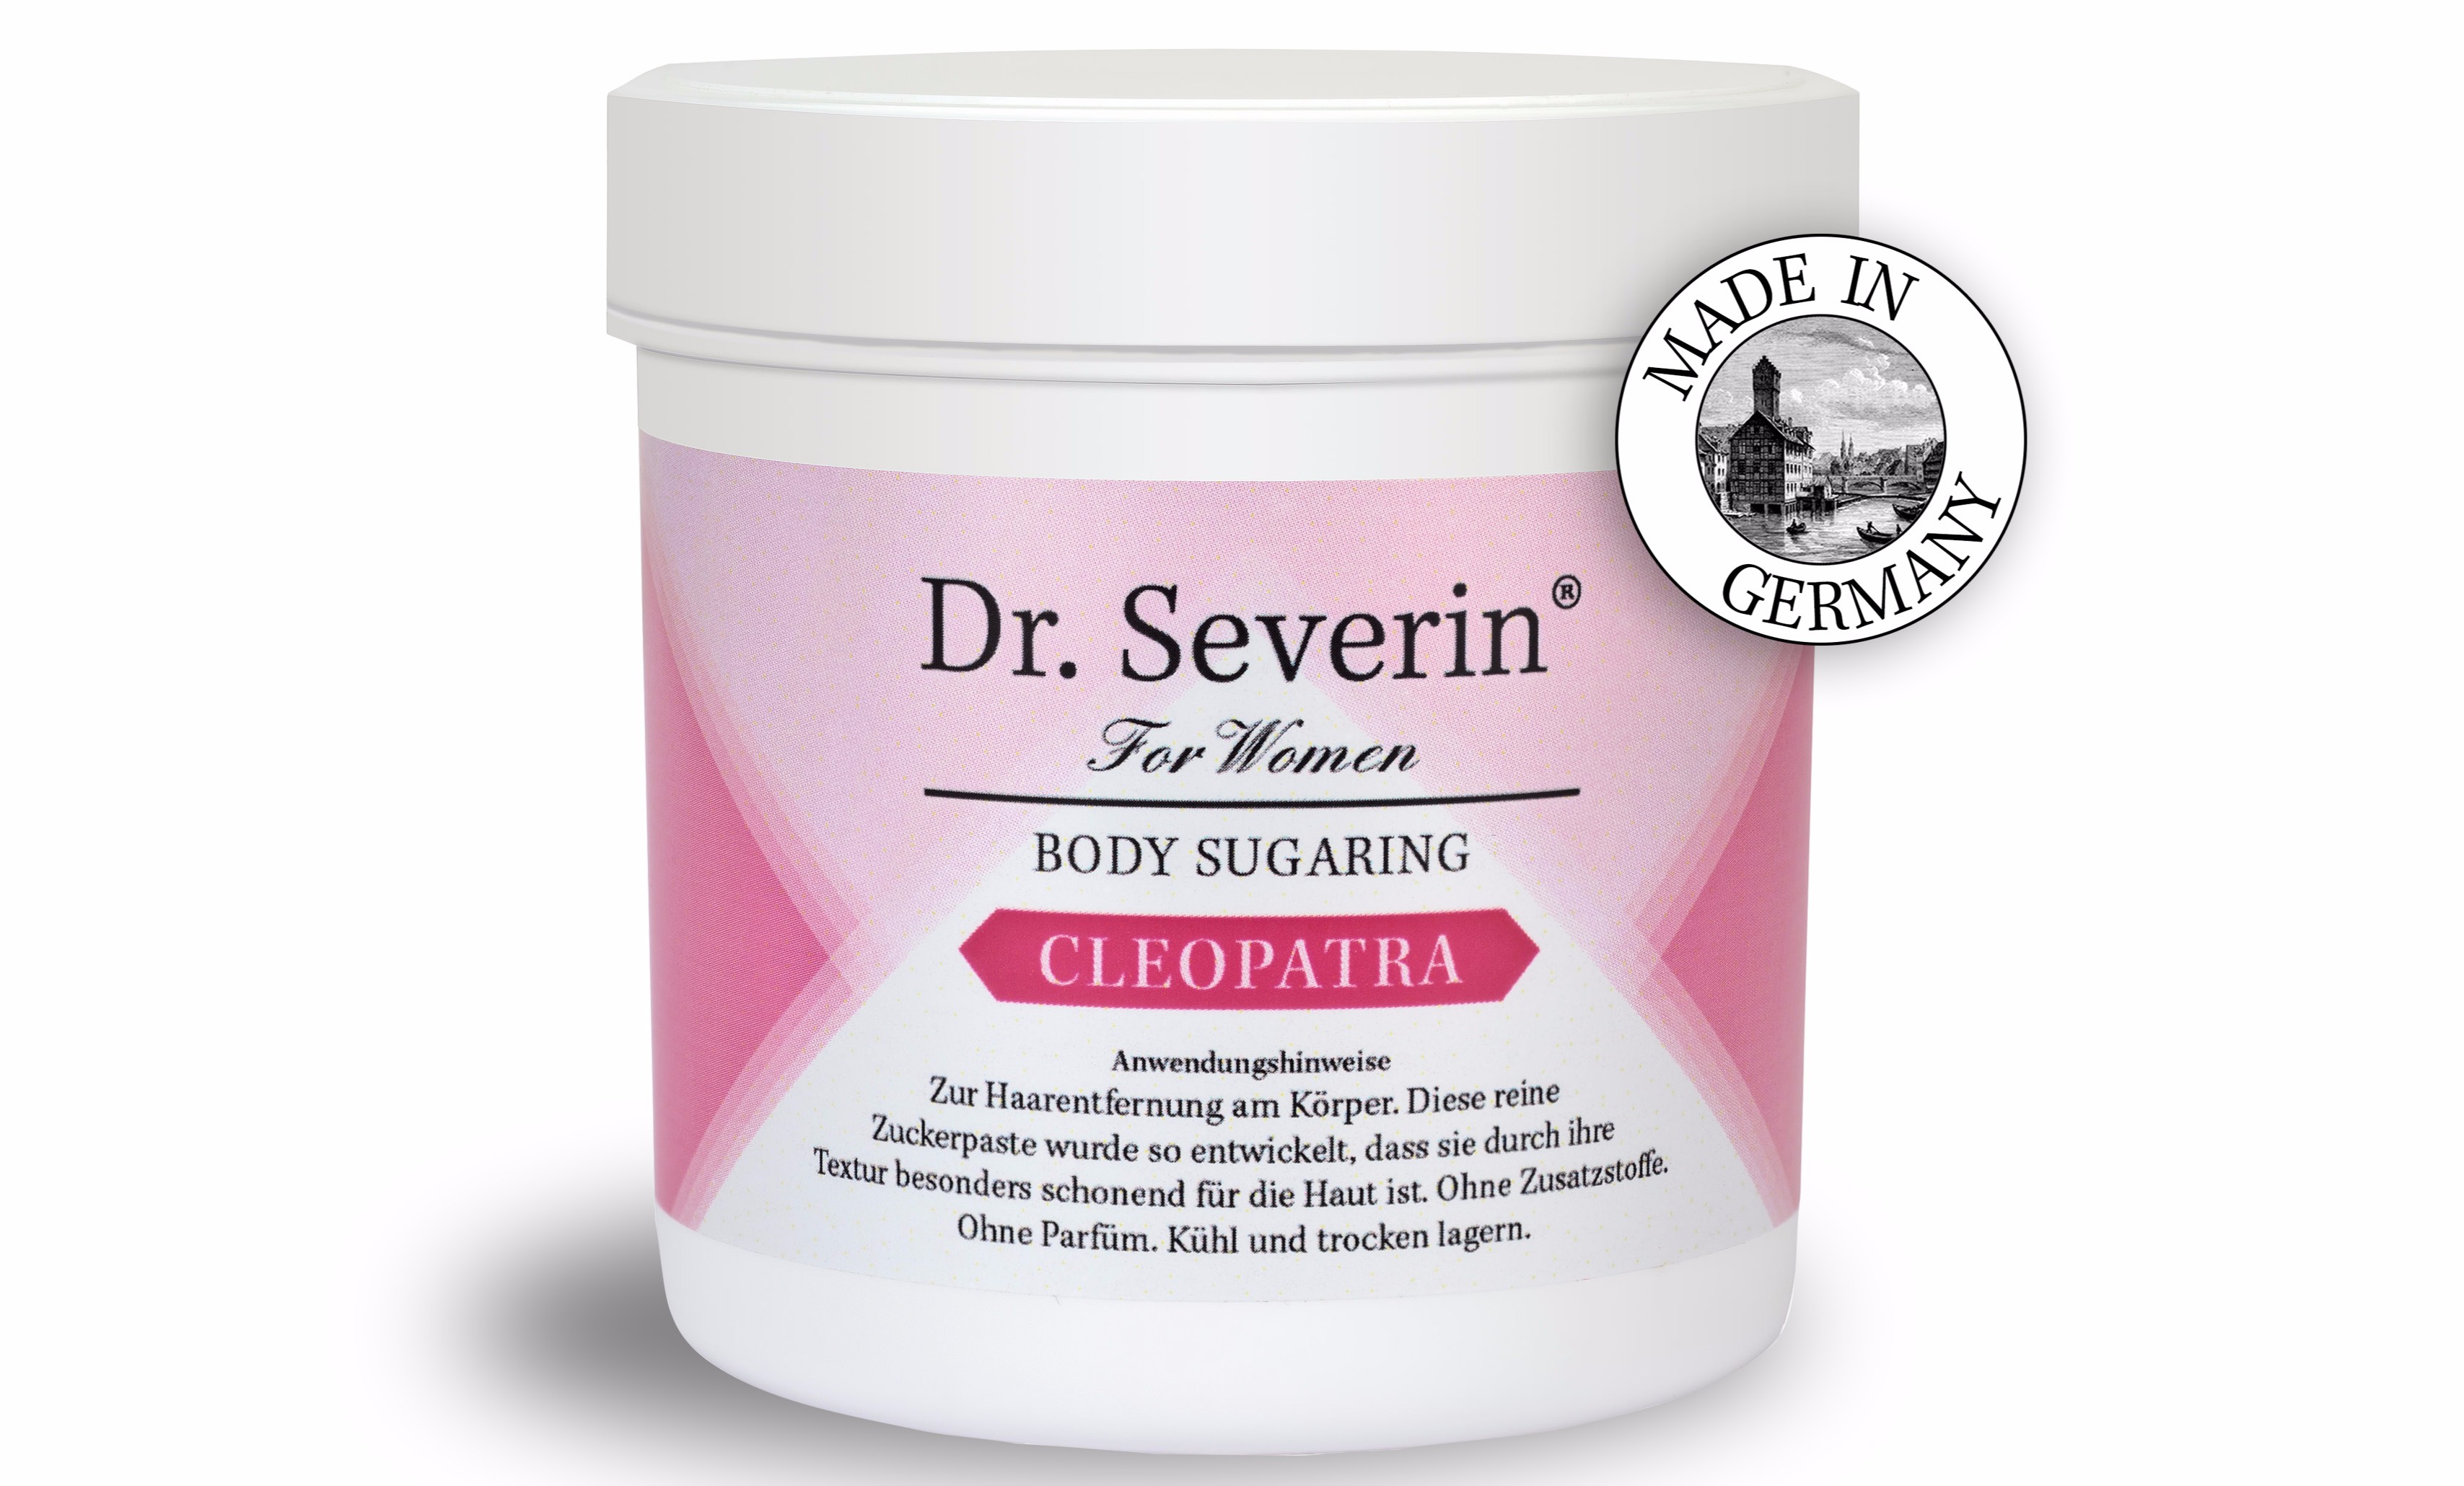 dr severin body sugaring